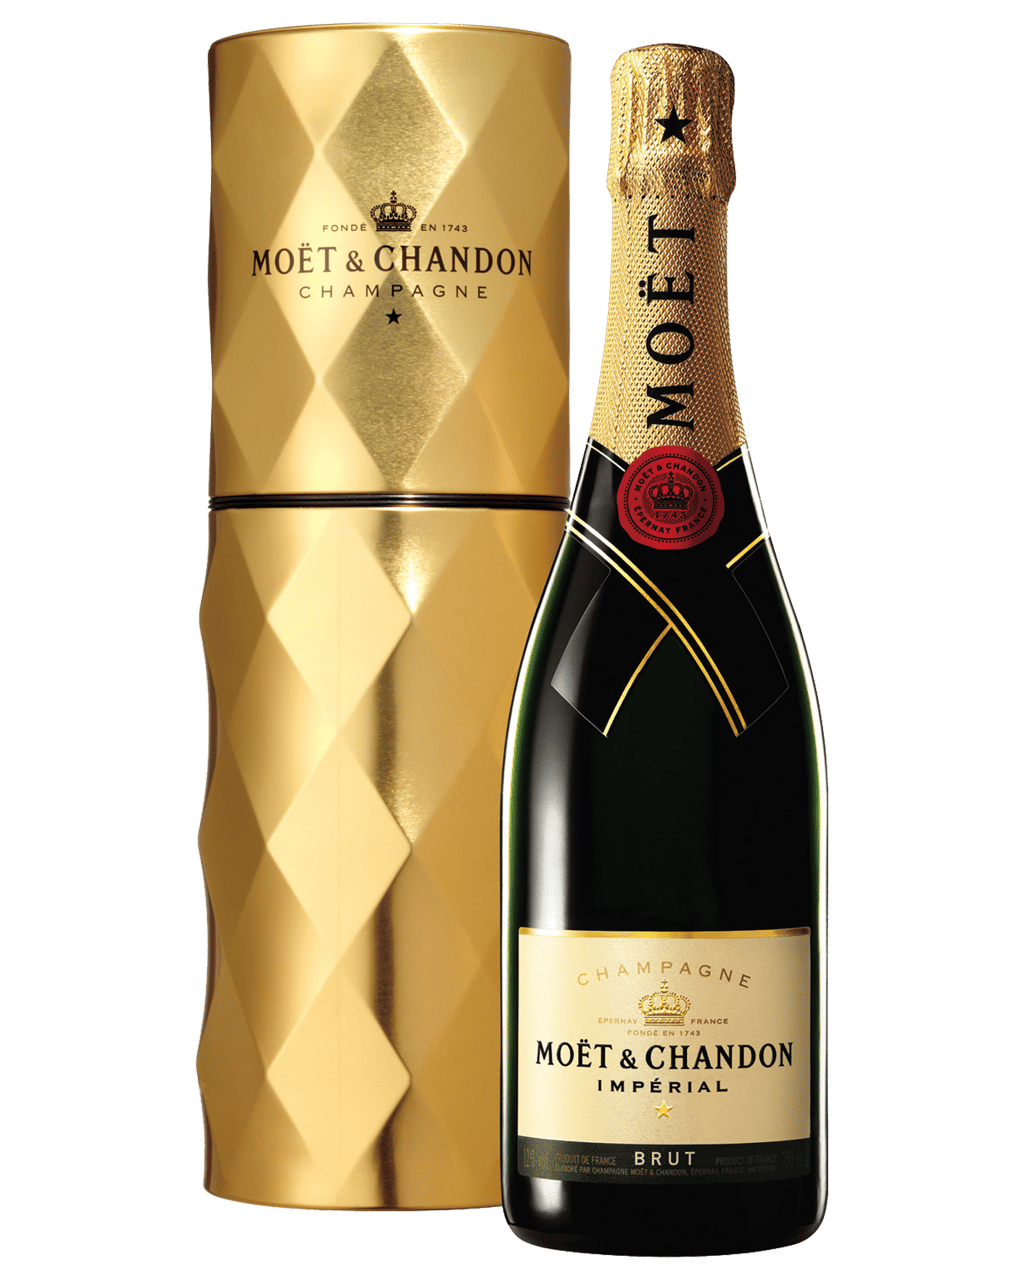 Buy MoÙt & Chandon Brut ImpÚrial Chill Box Online (Lowest prices in